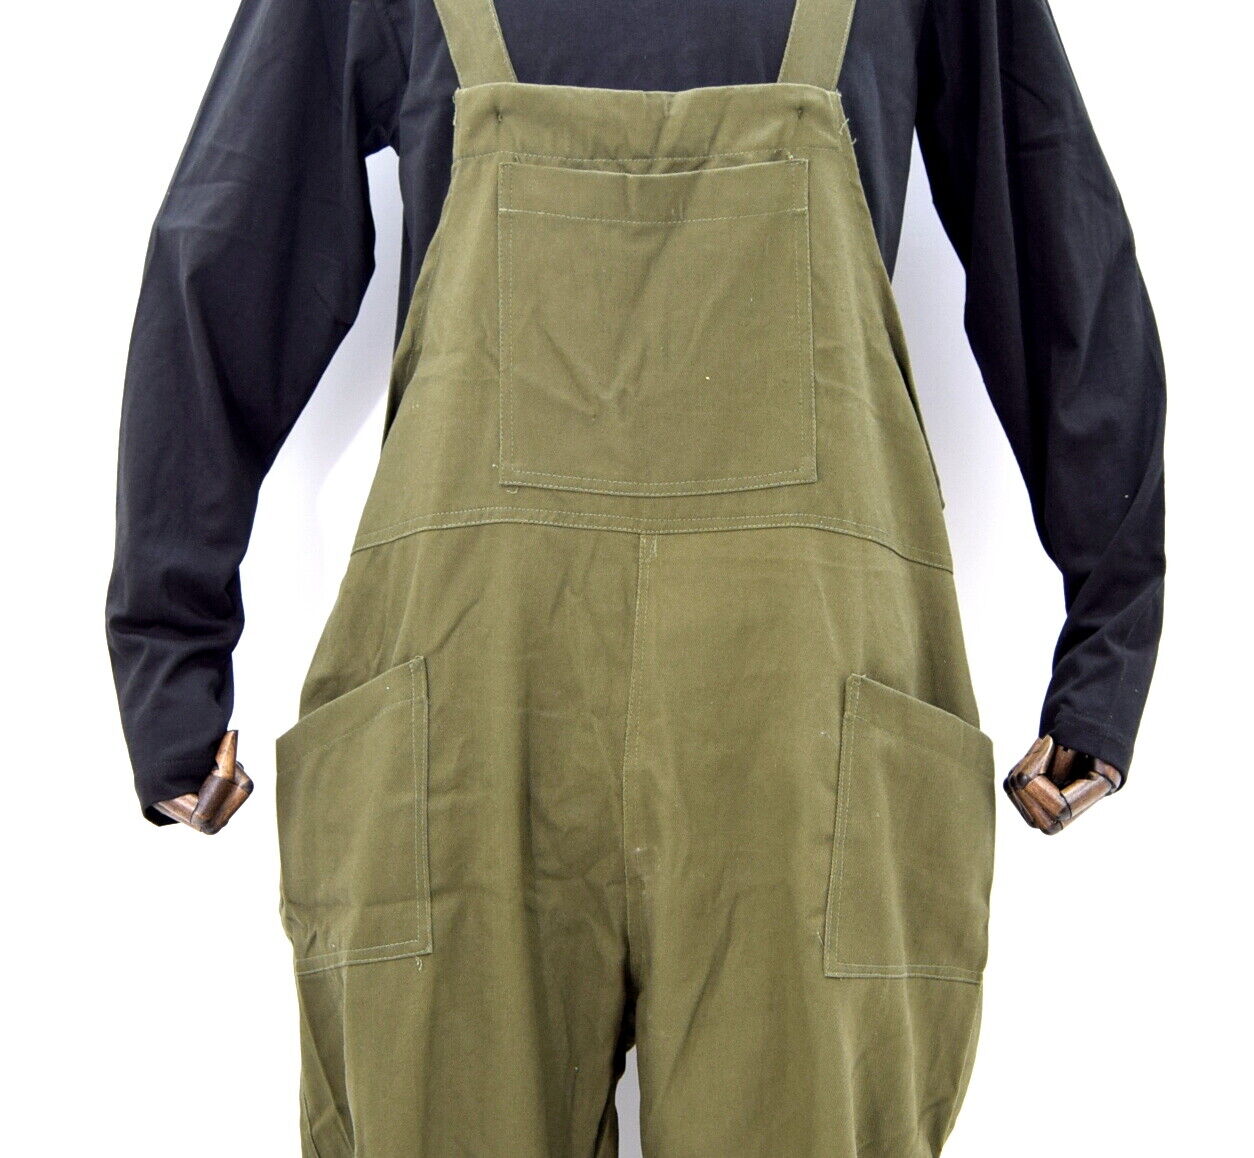 British Army Style Olive Bib & Brace Overalls / Dungarees Heavy Cotton Trousers